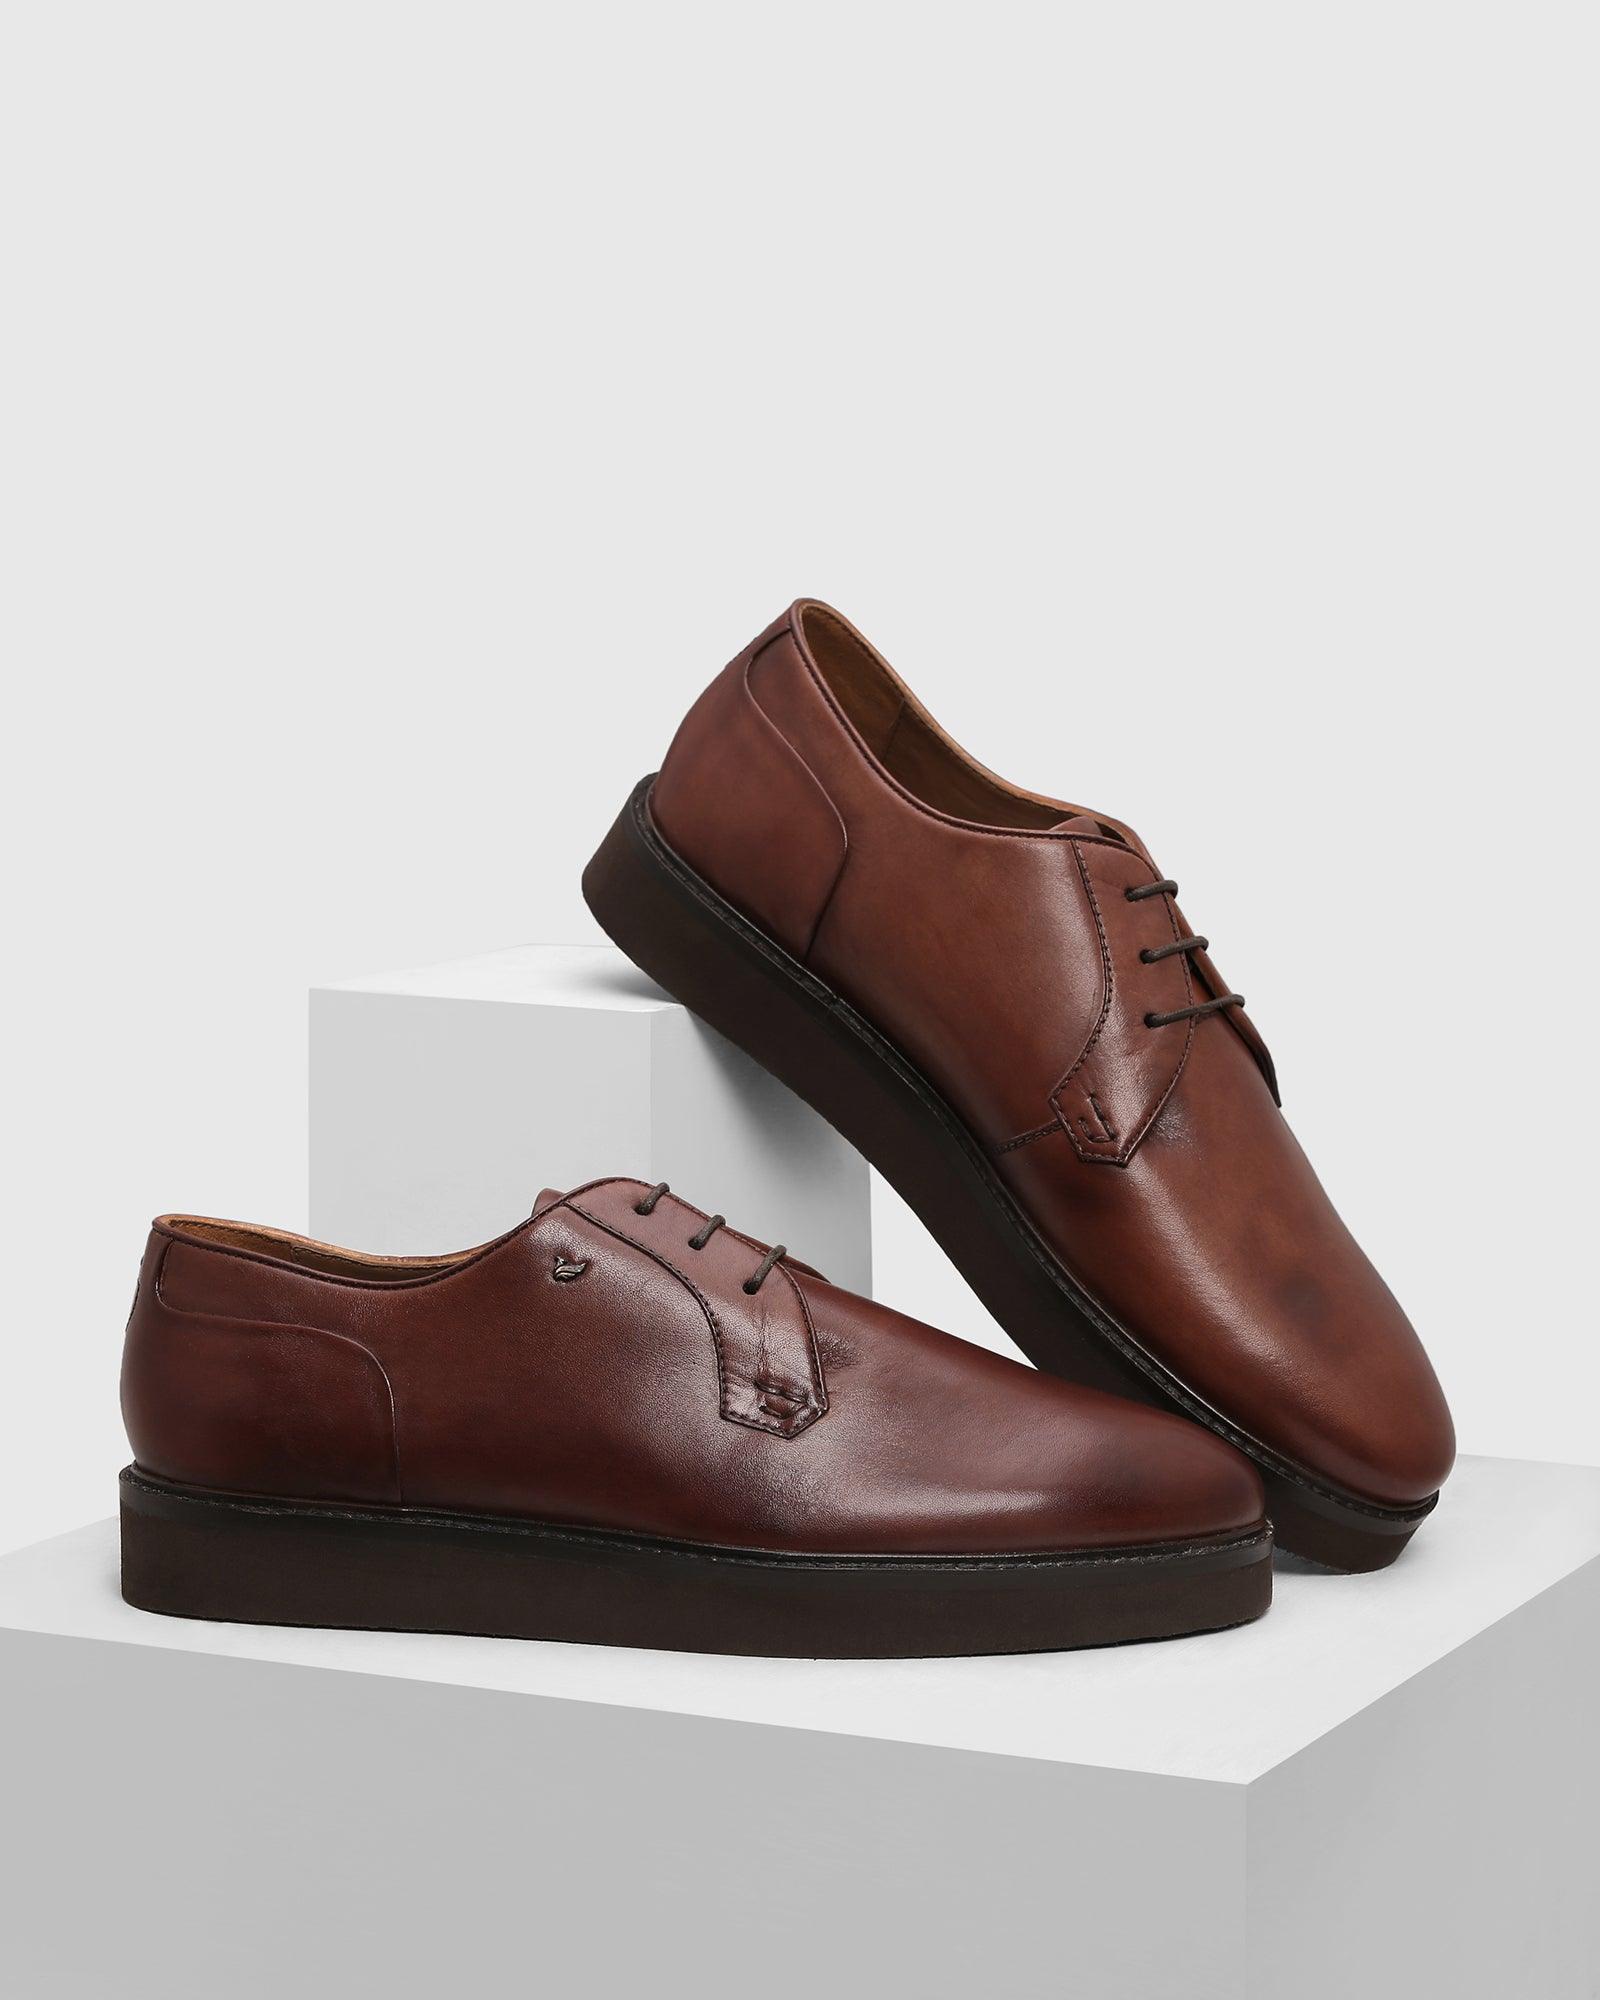 leather-formal-brown-solid-derby-shoes---prex